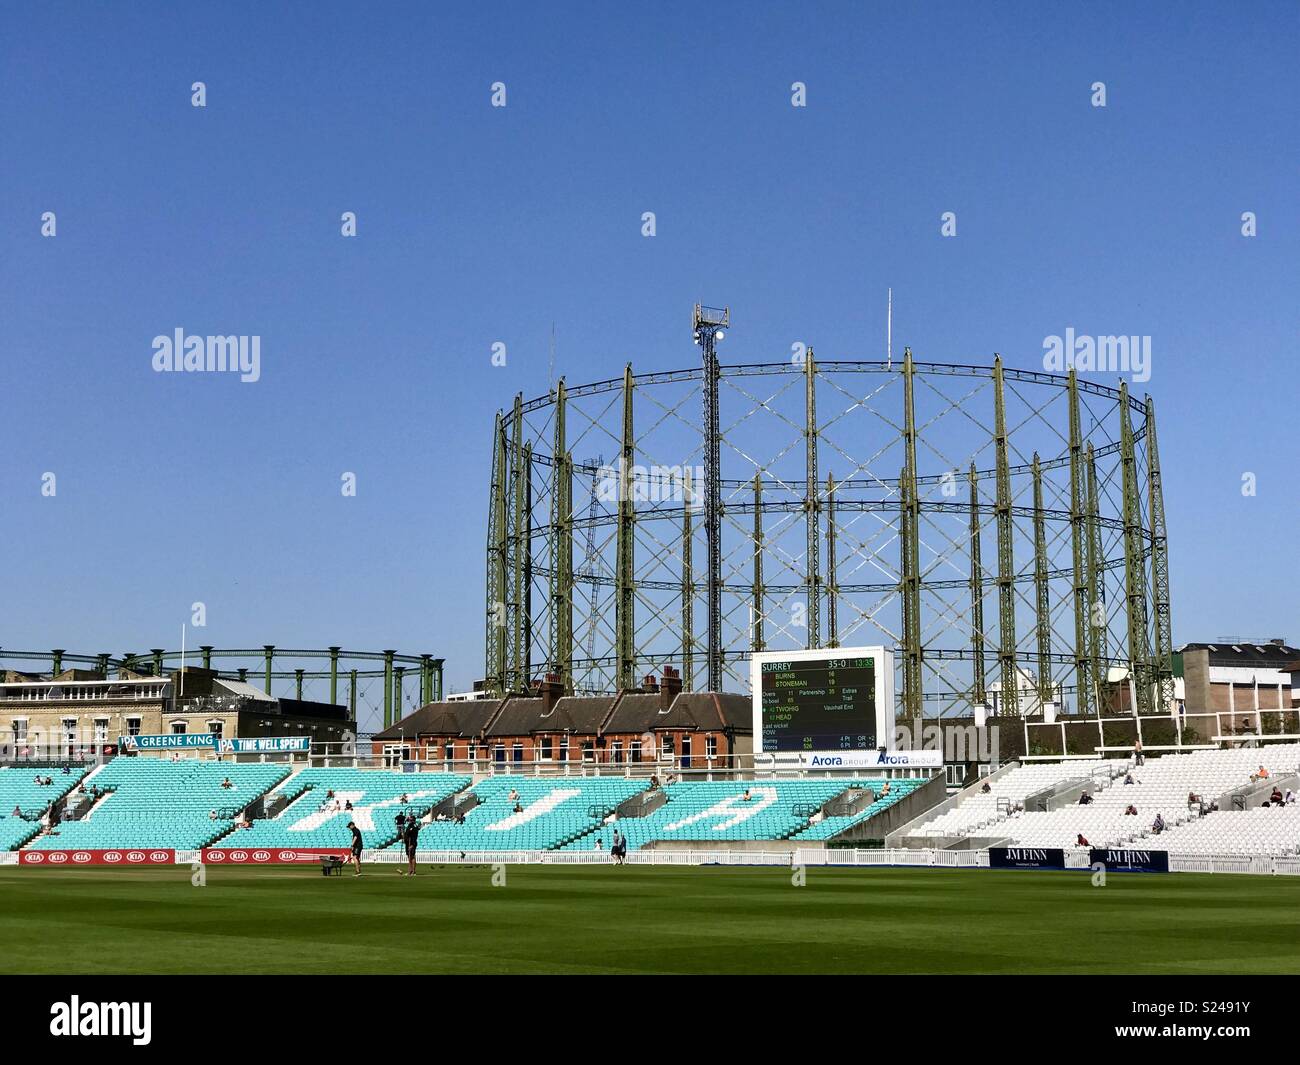 L'Oval Cricket Ground Banque D'Images